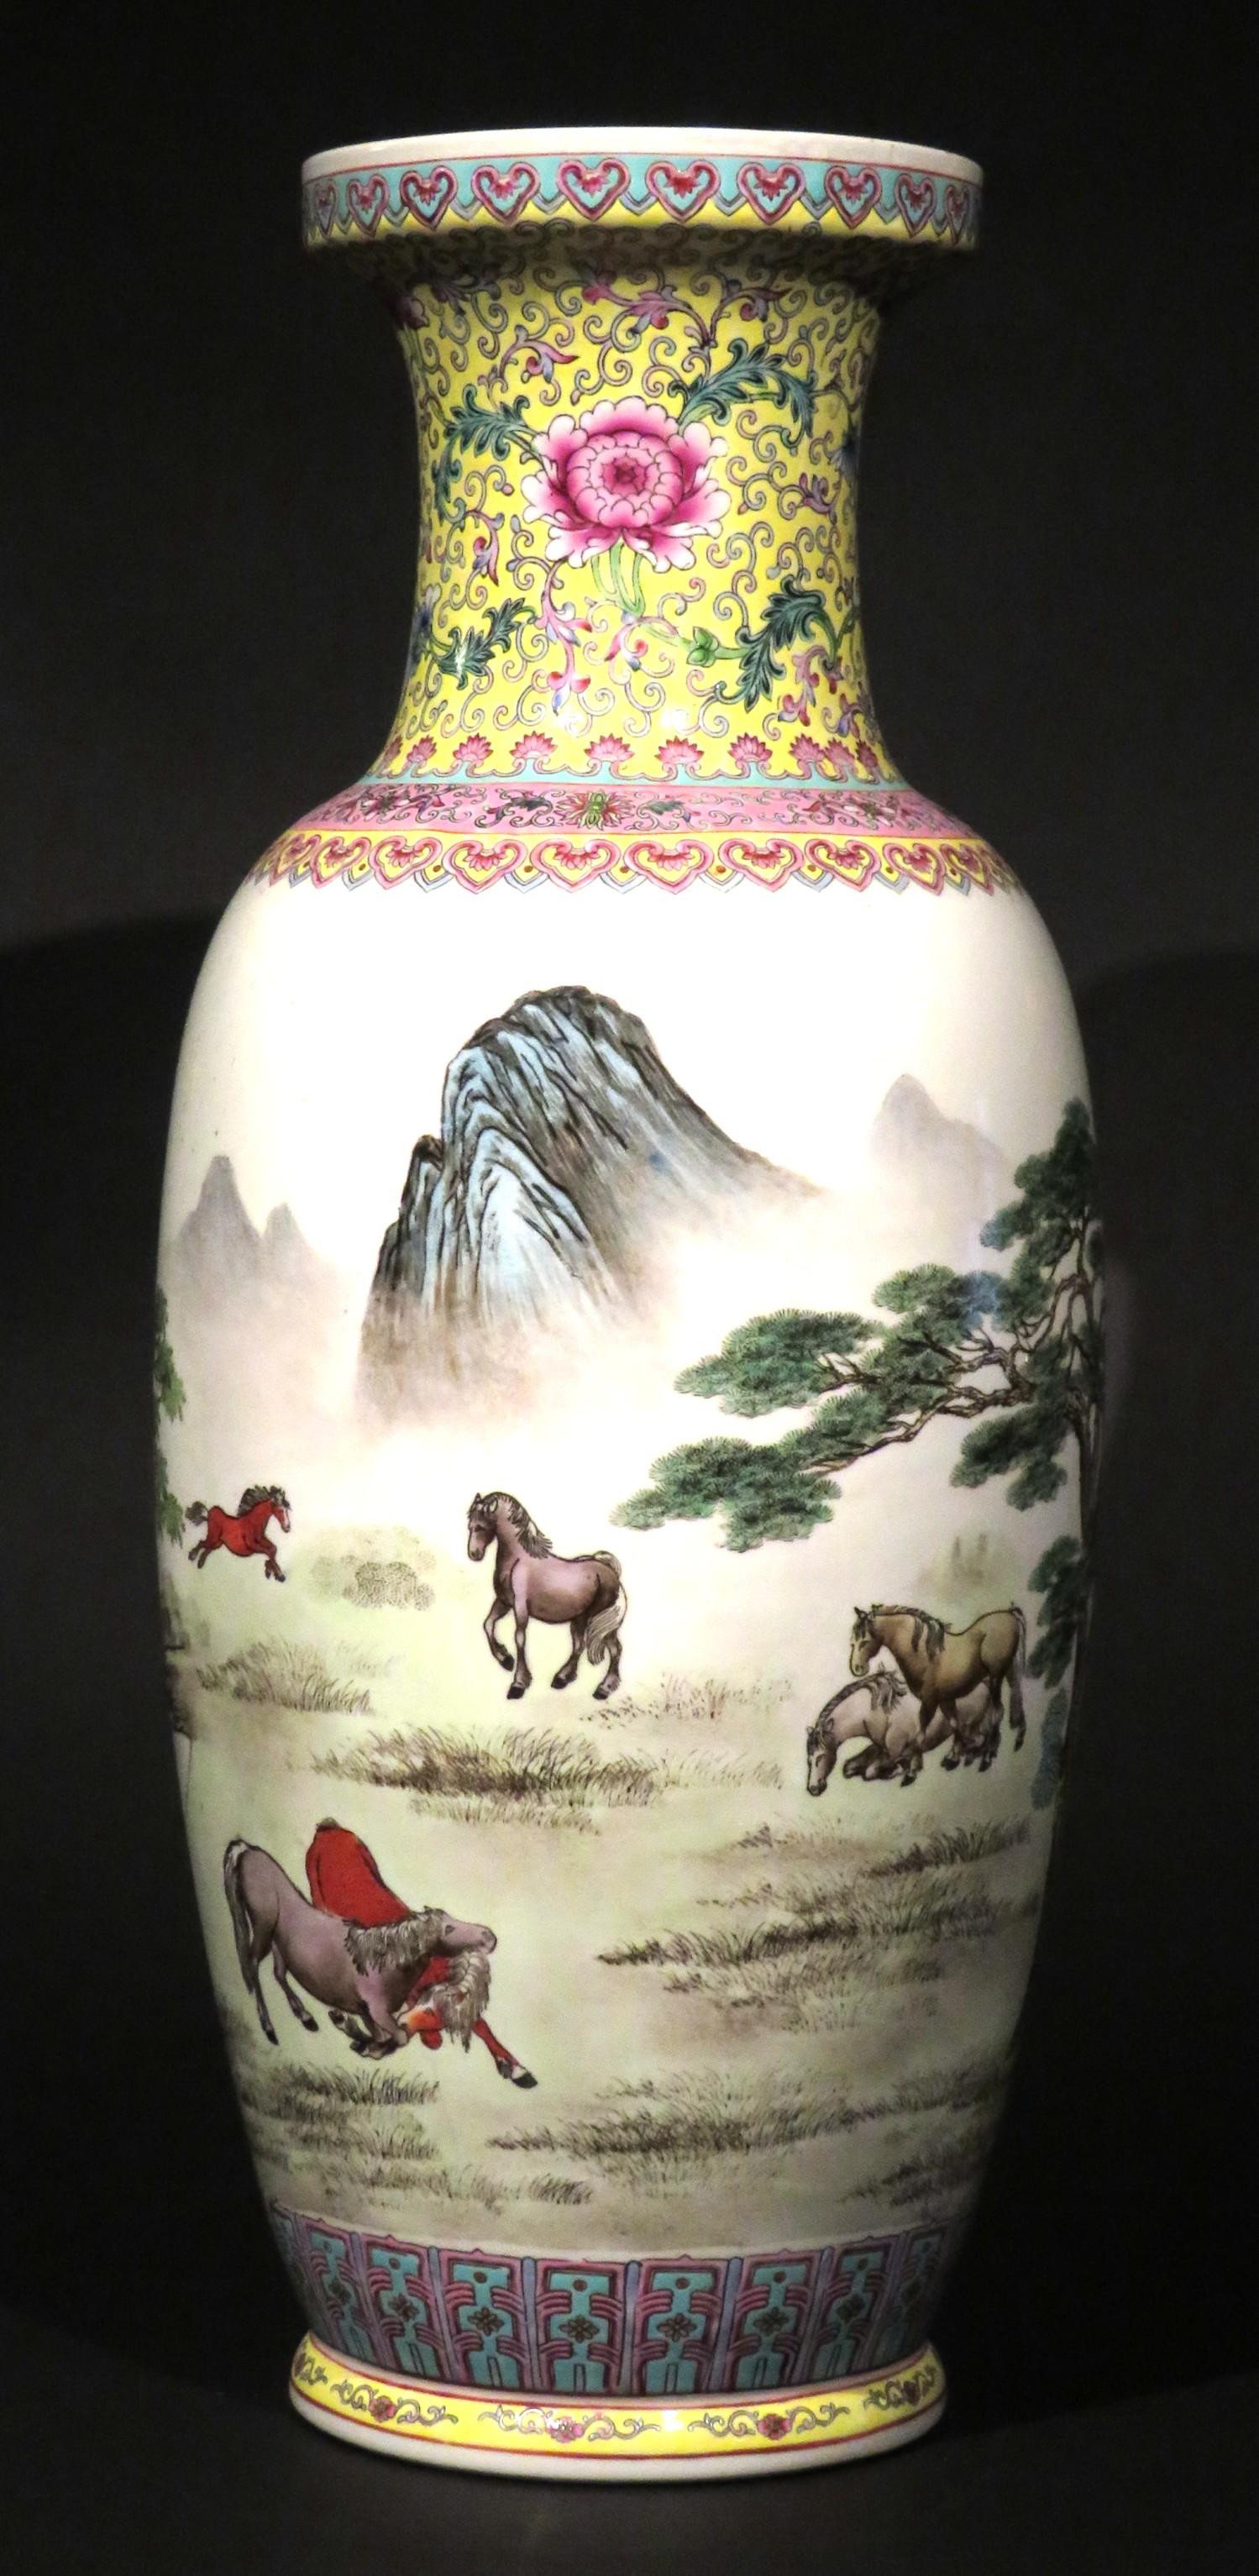 The large Jingdezhen period baluster shaped body finely decorated with hand painted enamels depicting the ‘Eight Horses of Wang Mu’ against a treed & mountainous landscape, together with rows of verses in hand painted calligraphy, the base & neck